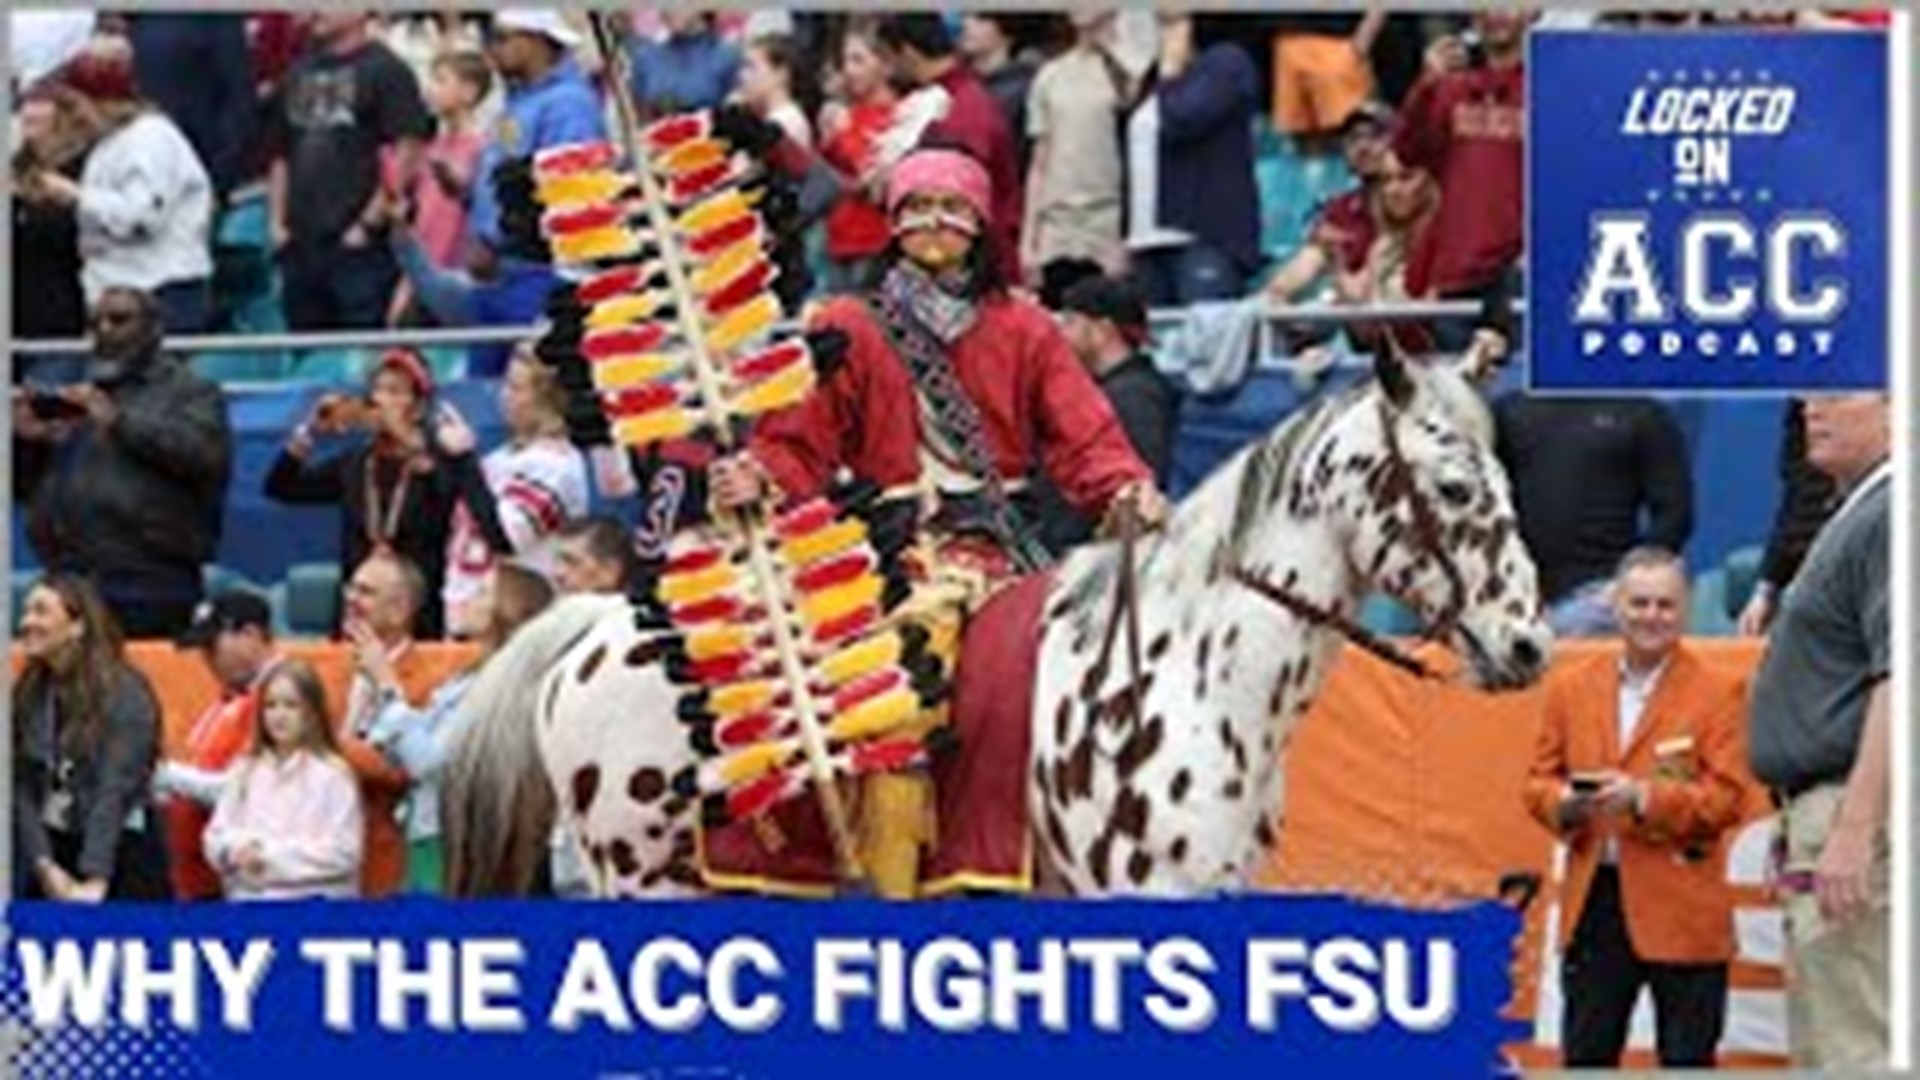 What is the end game for the ACC in their legal battles against Florida State University? Should the conference consider settling sooner than later?